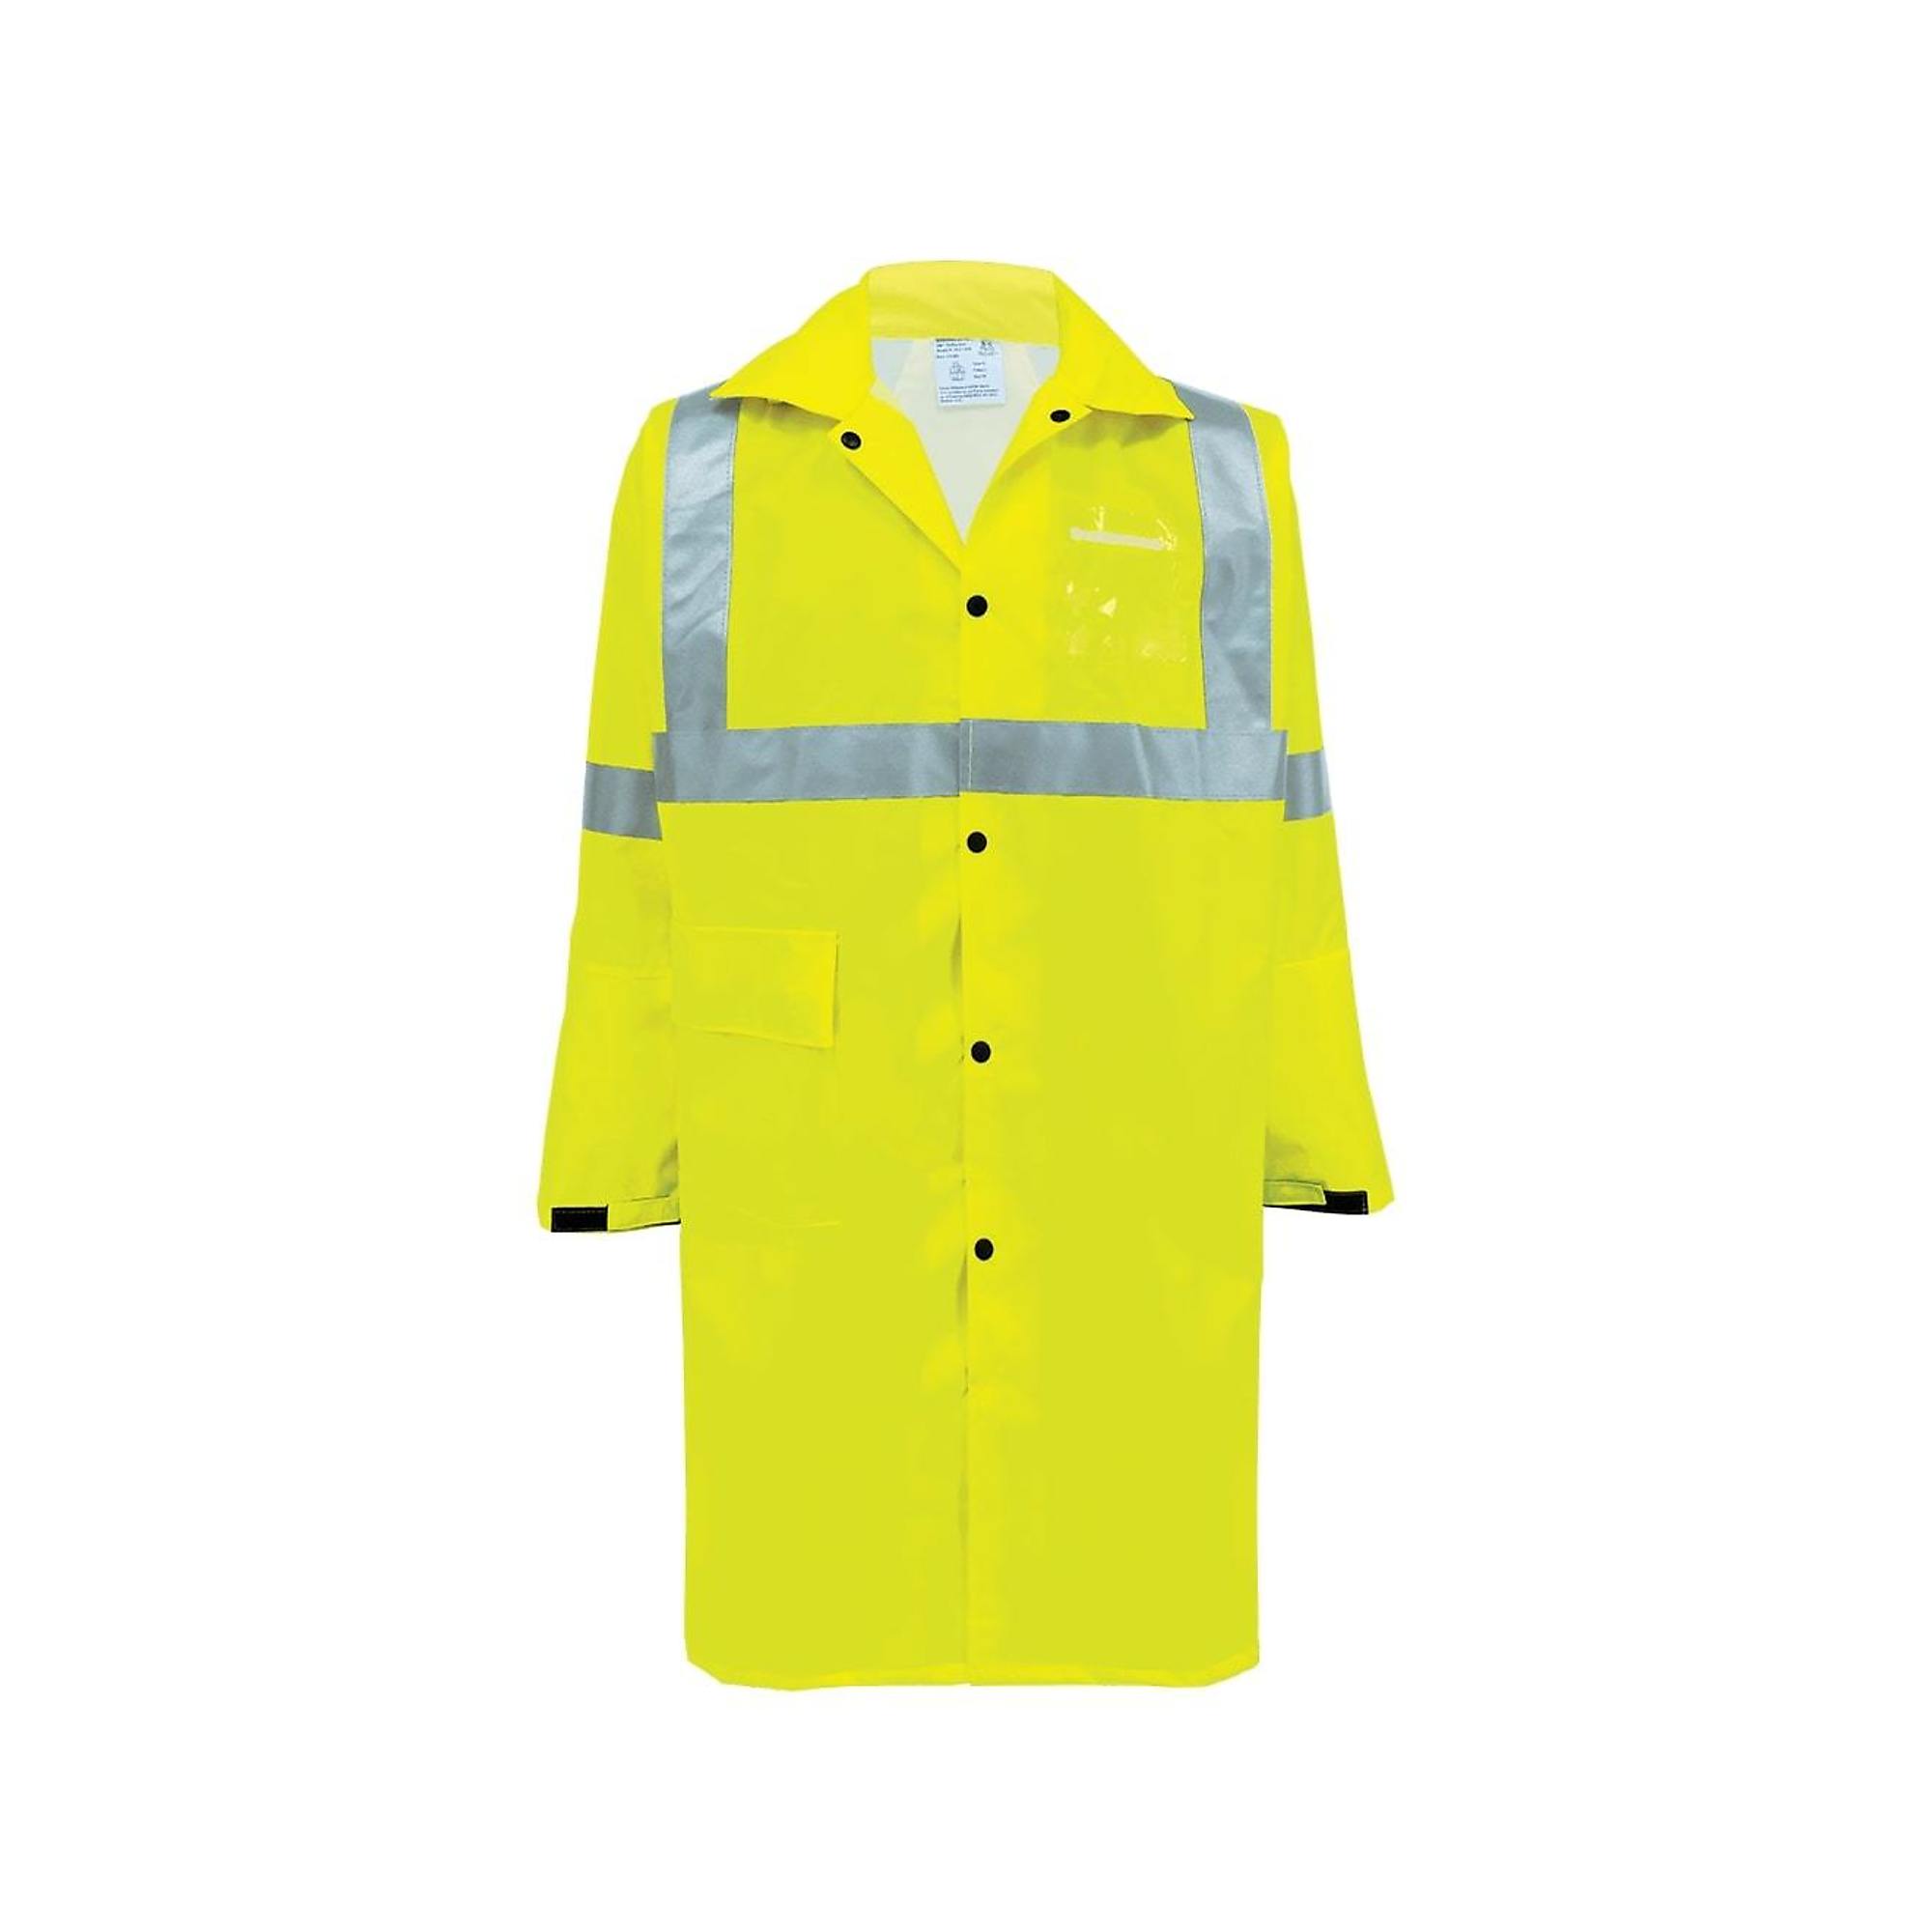 FrogWear, HV Yel/Grn, Class 3 Self-Extinguish, 1 Pocket Duster Jacket, Size 2XL, Color High-Visibility Yellow/Green, Model GLO-1450-2XL